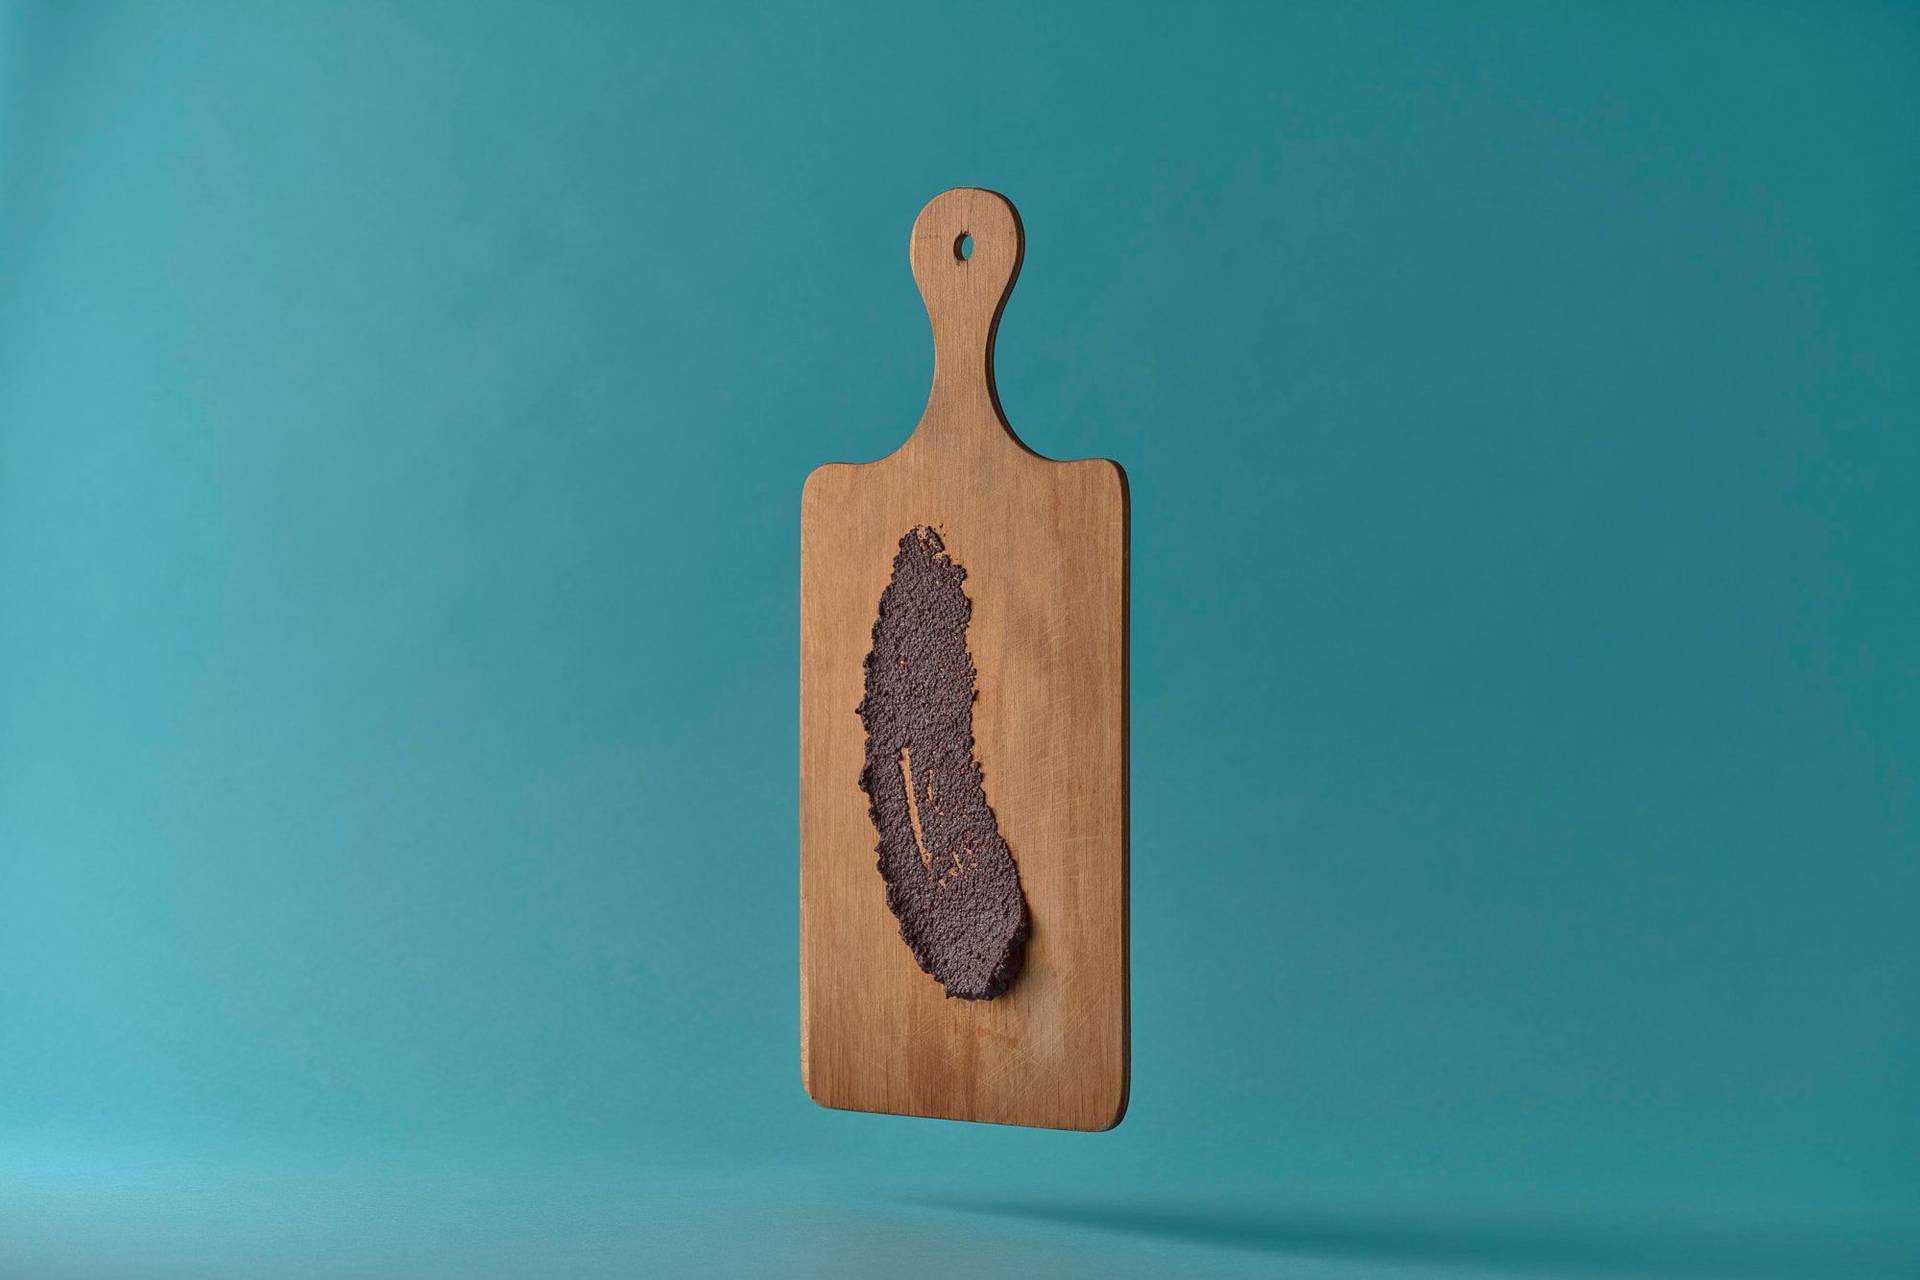 olive tapenade from pouli on a wooden board on blue background